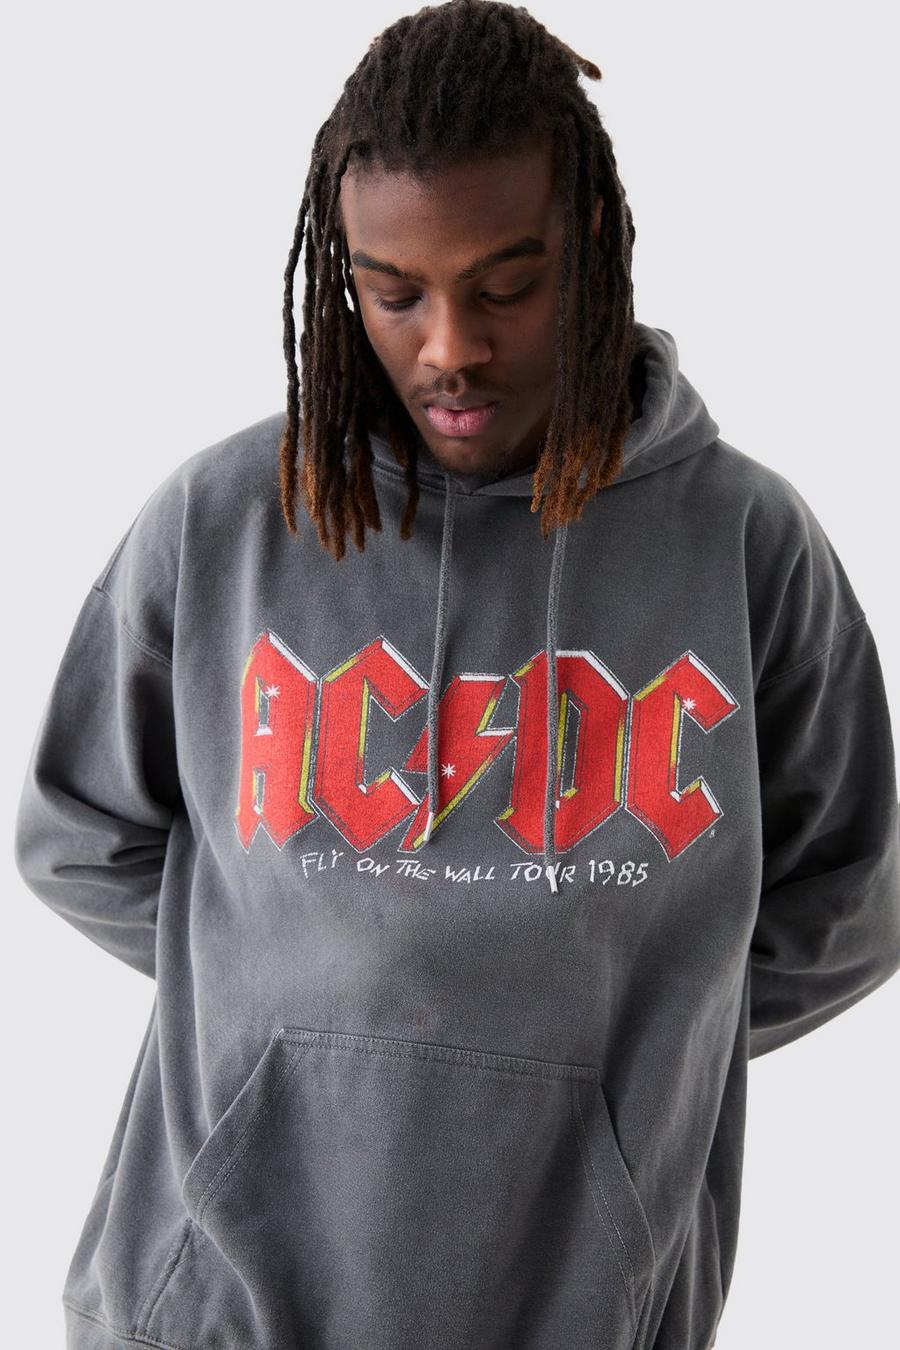 Charcoal grey Oversized ACDC Band Wash License Hoodie